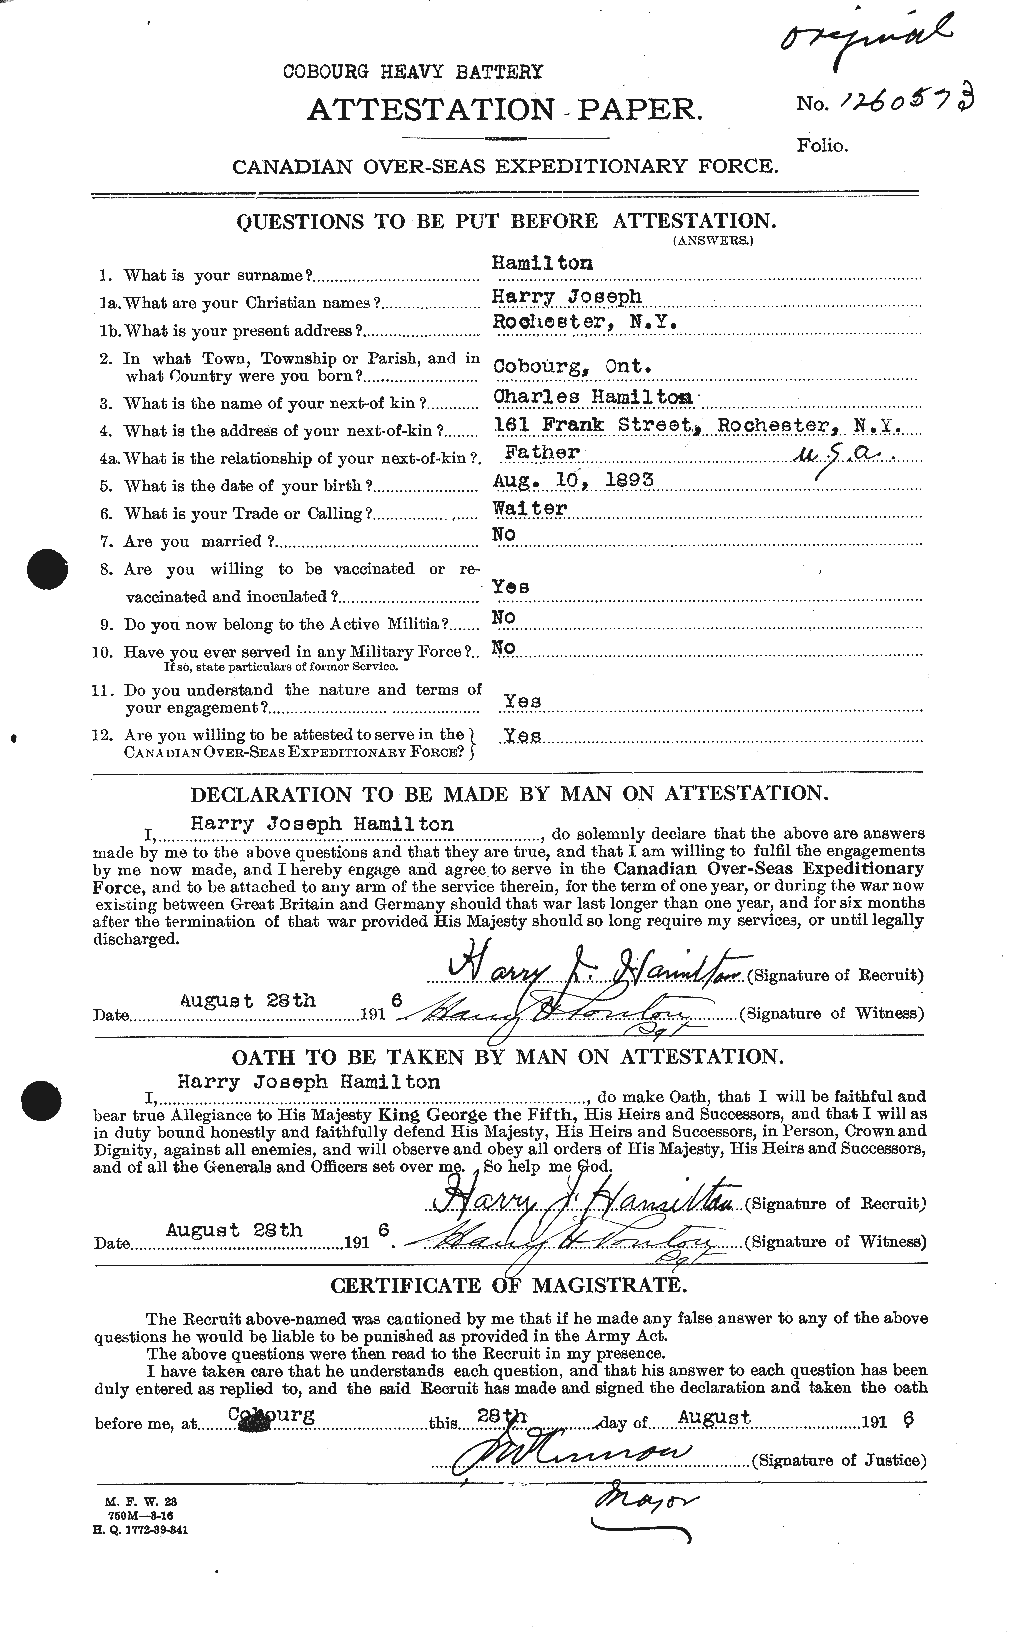 Personnel Records of the First World War - CEF 372512a